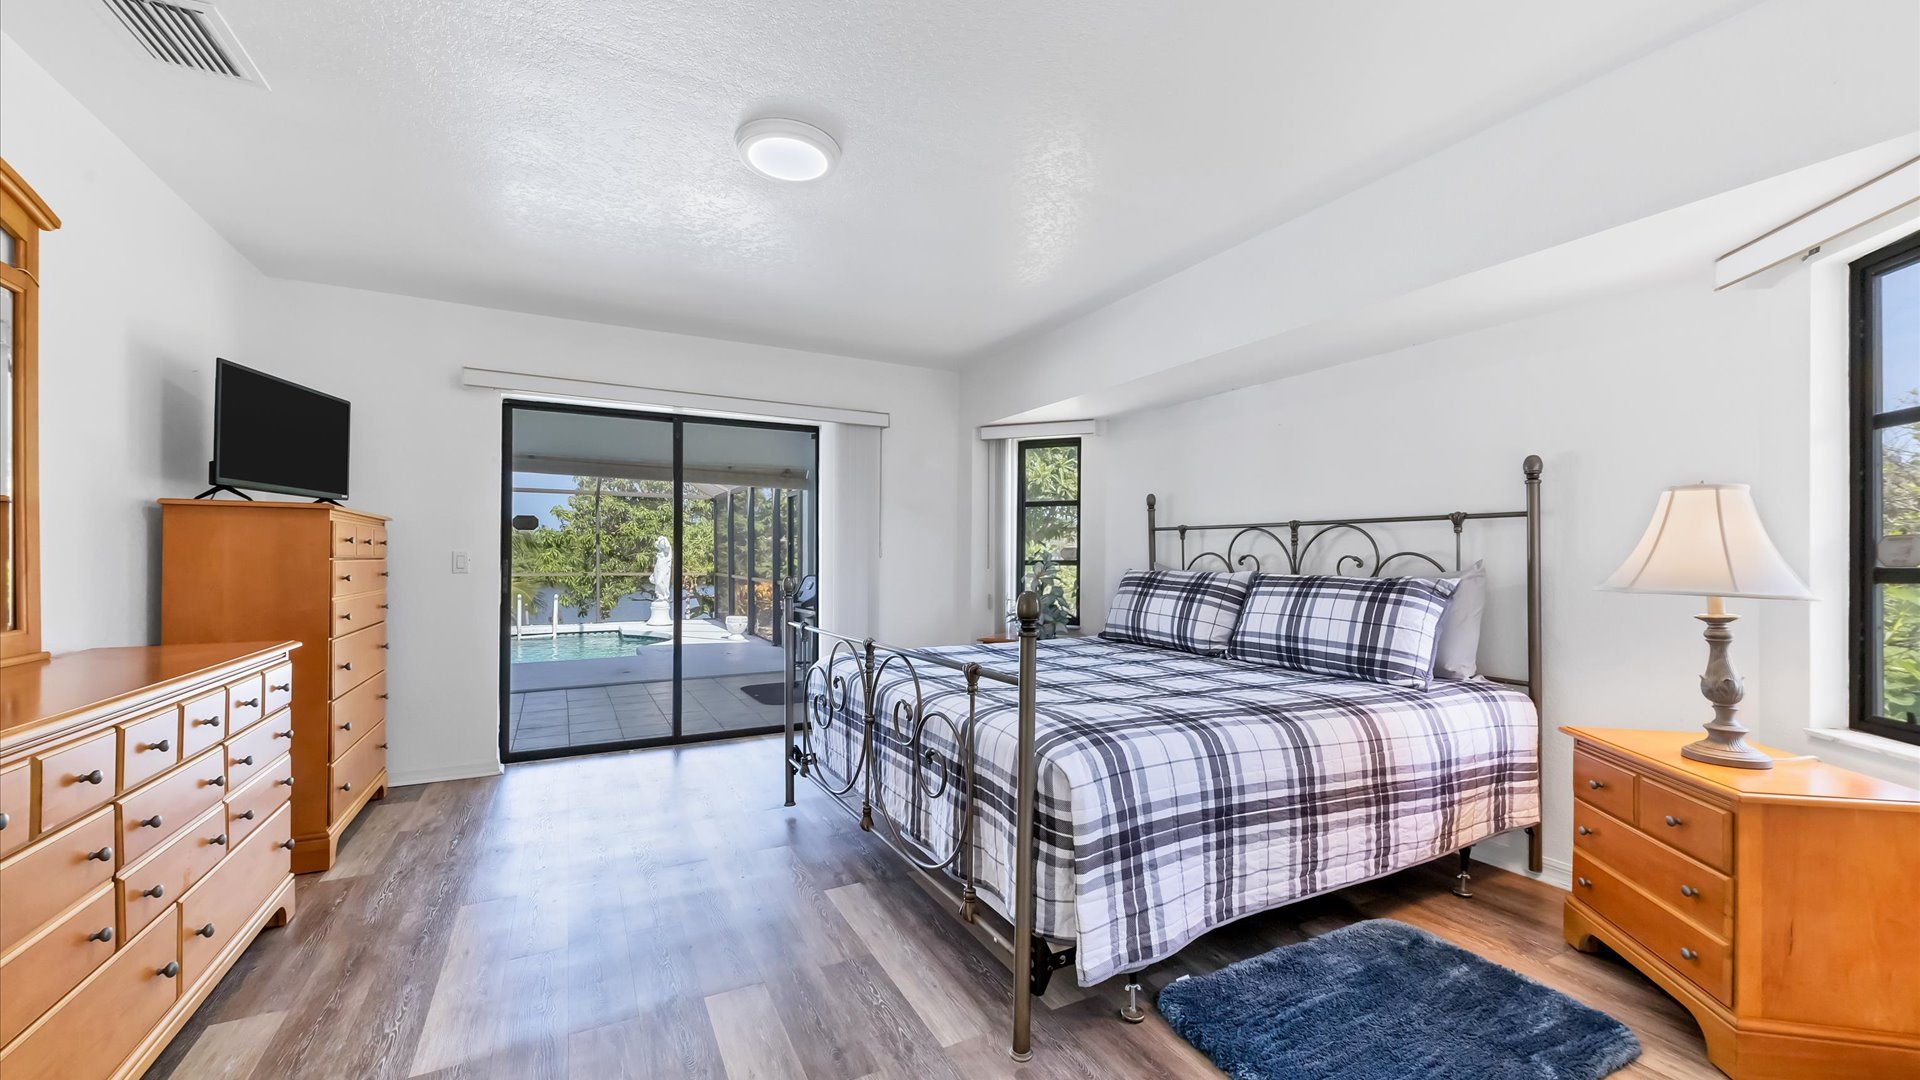 King master bedroom with lanai access with 32